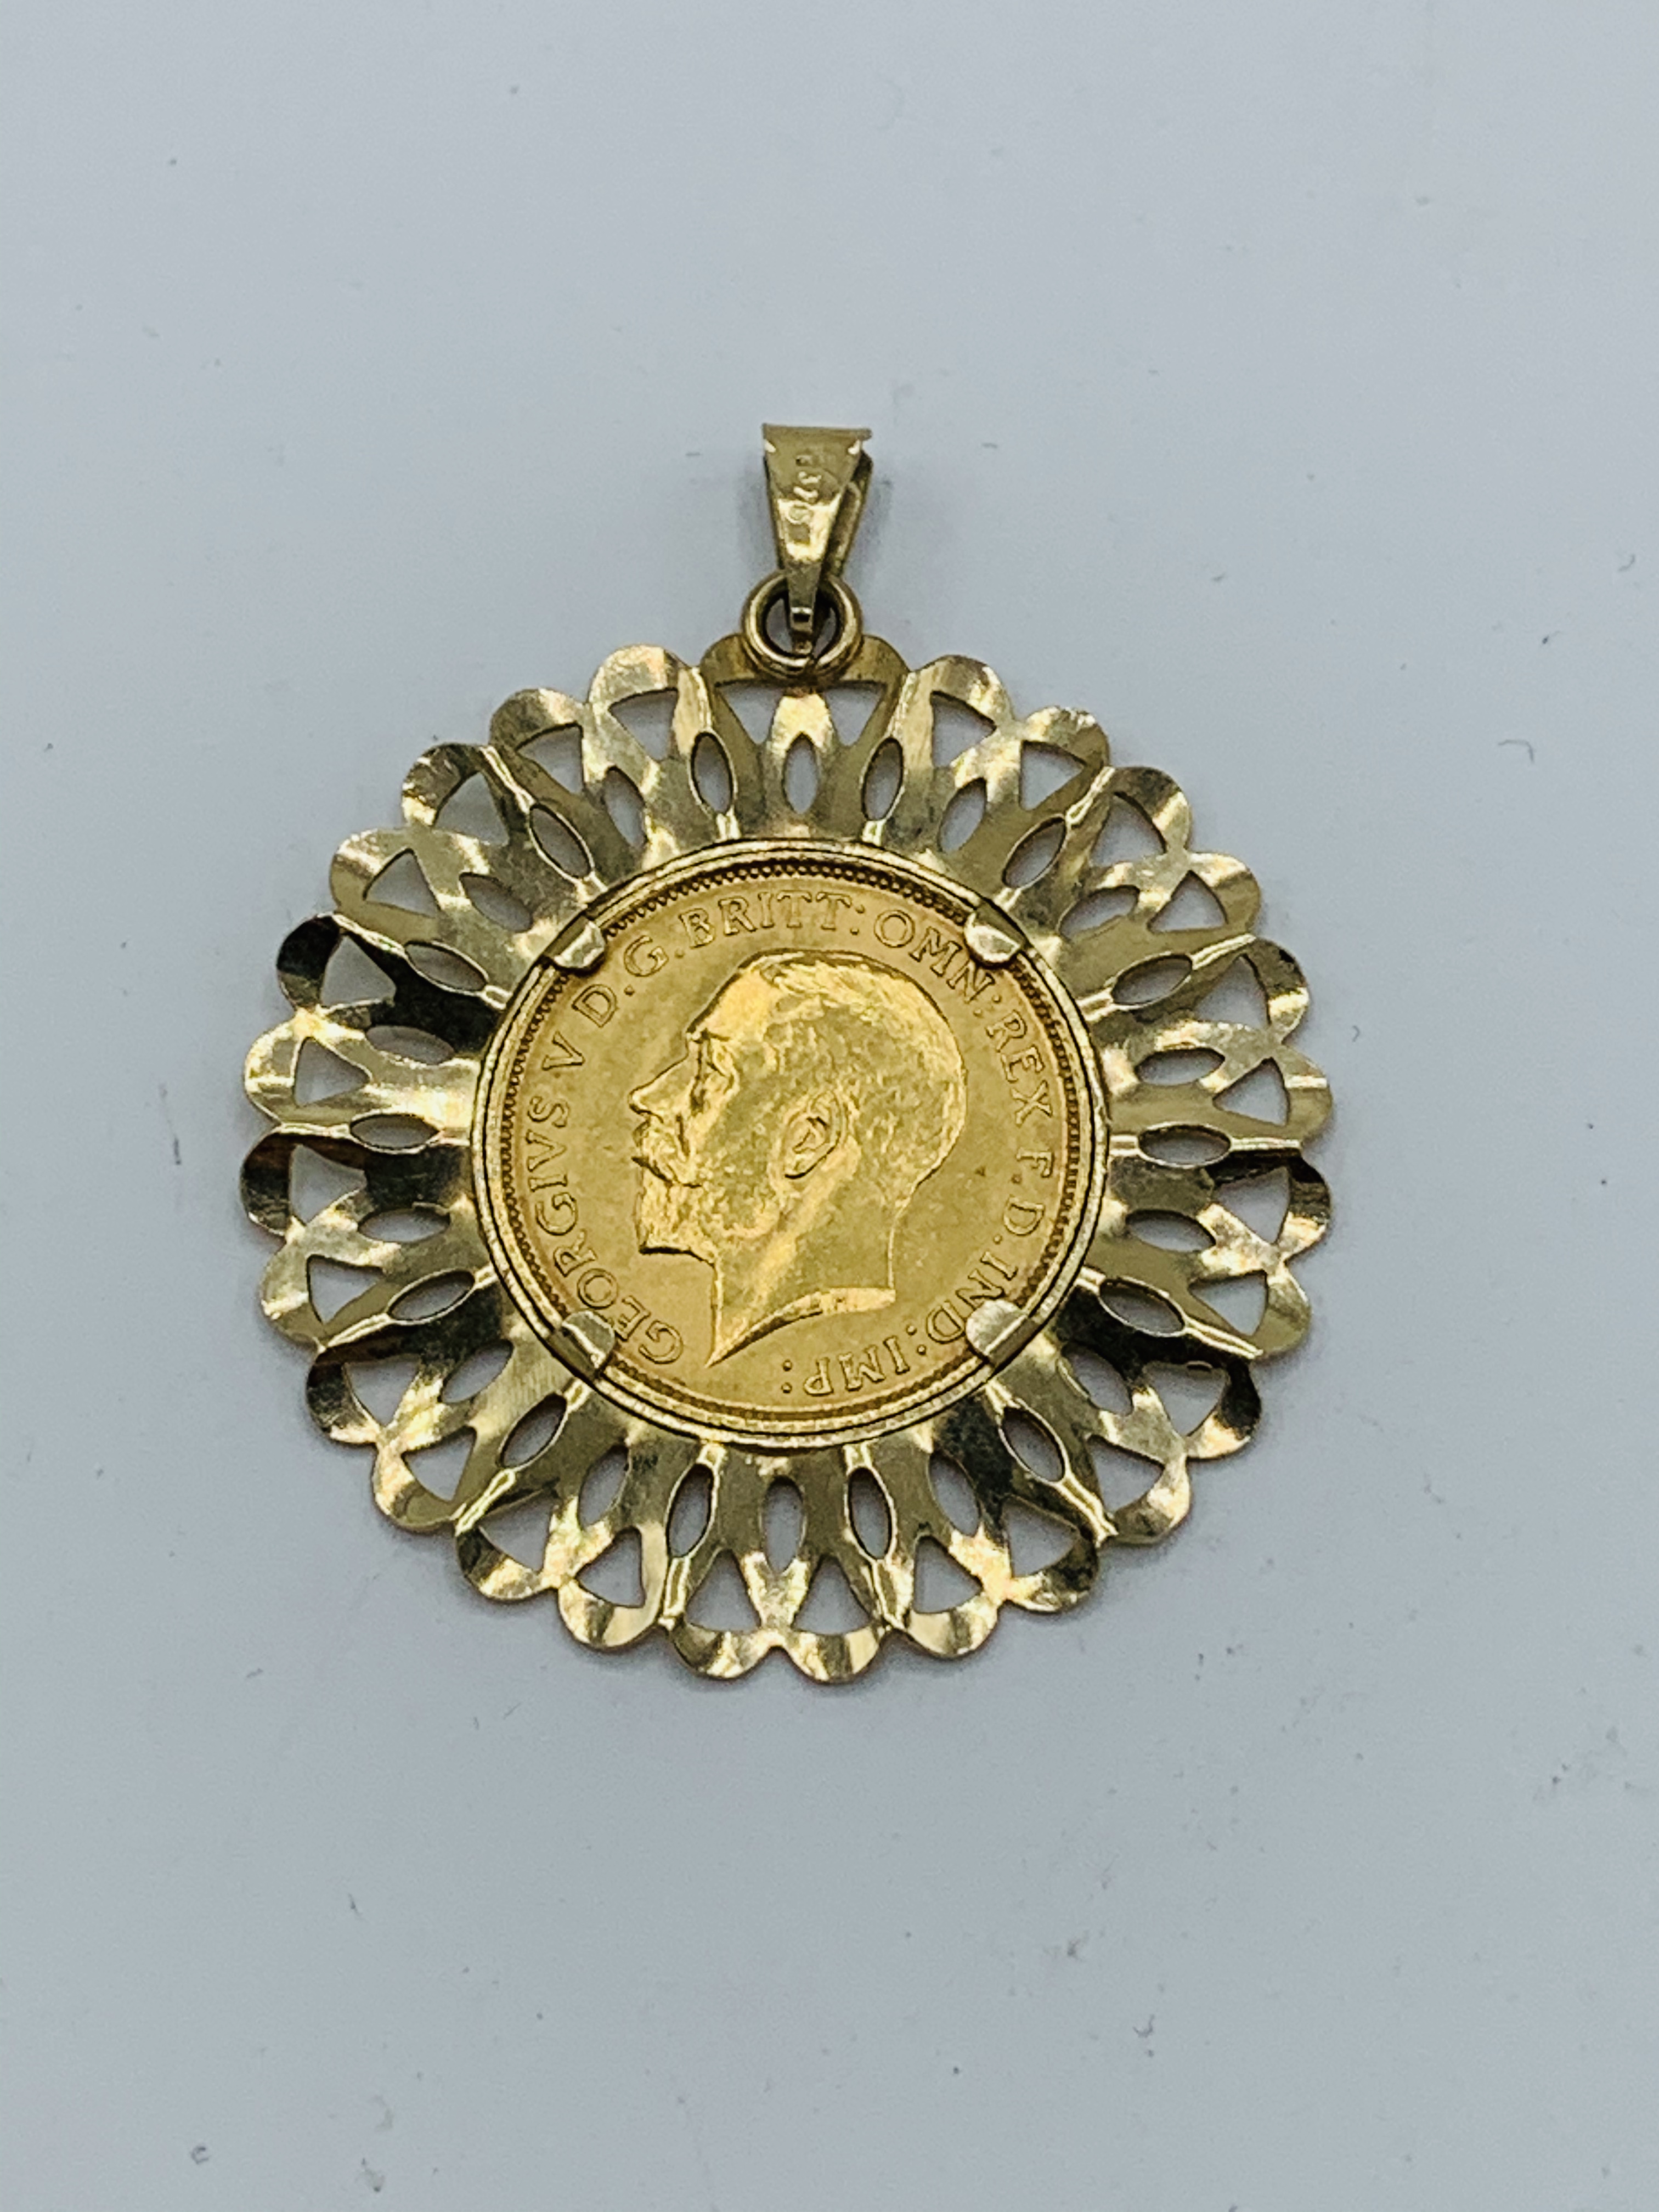 1915 gold half sovereign in 9ct gold pendant, 6.5gms - Image 2 of 2